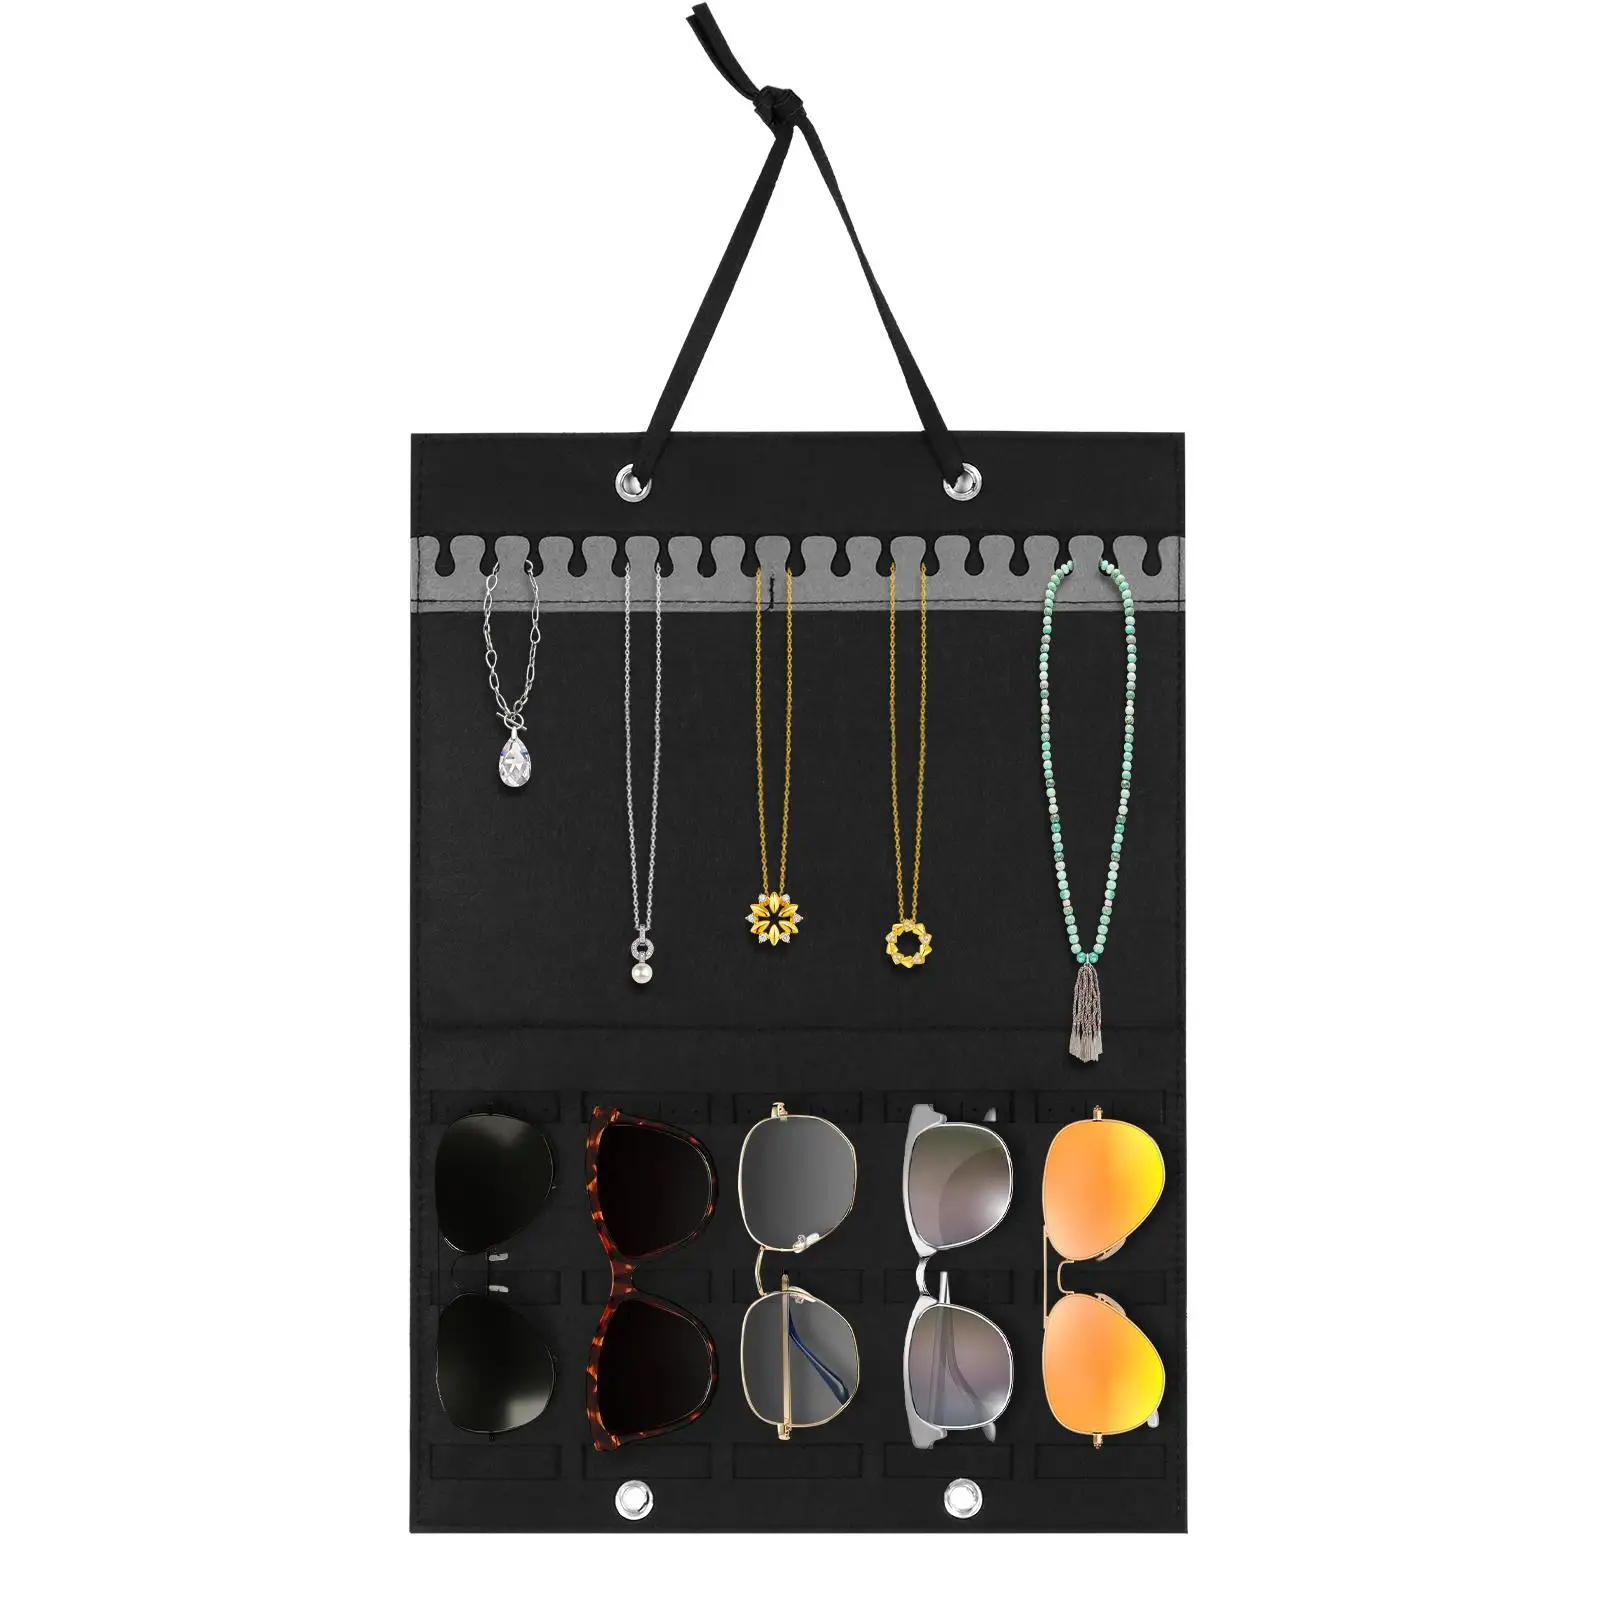 Hanging Jewelry Organizer Storage, Double Sided Jewelry Storage Organizer, Earrings Hanger, Jewelry Holder for Showcase Wall